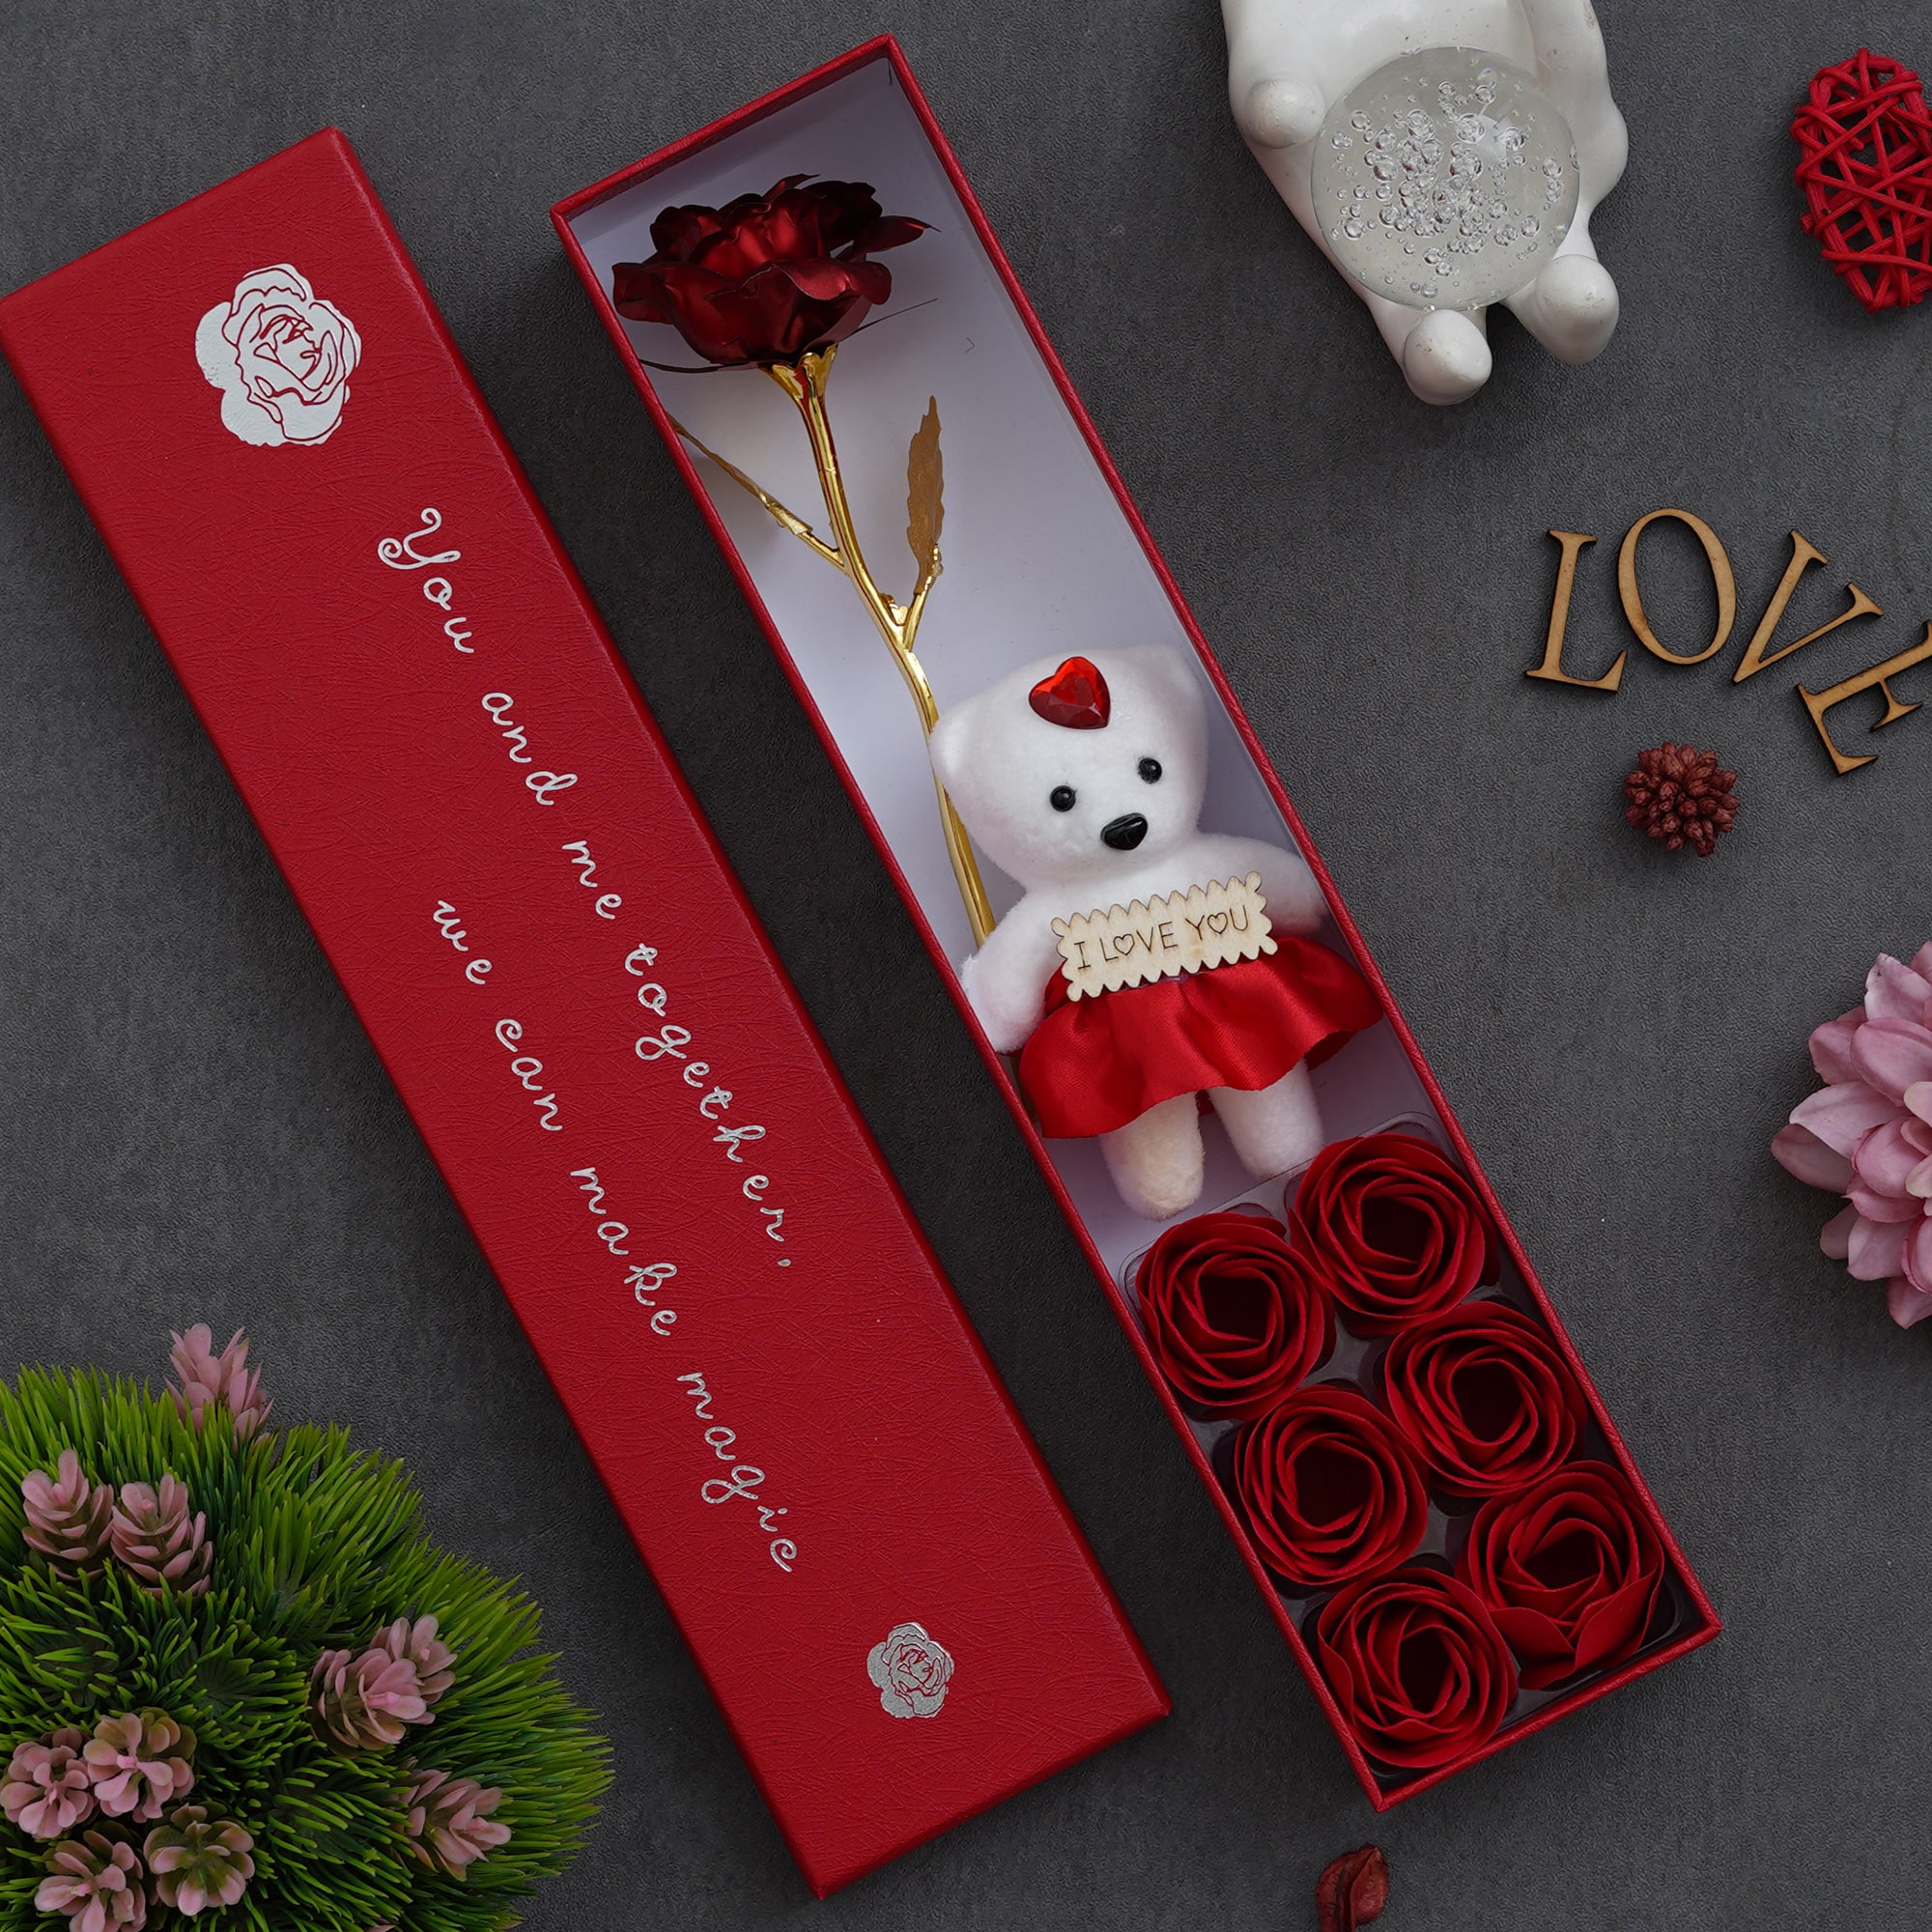 Valentine Combo of Set of 8 Love Post Cards Gift Cards Set, Red Gift Box with Teddy & Roses 3